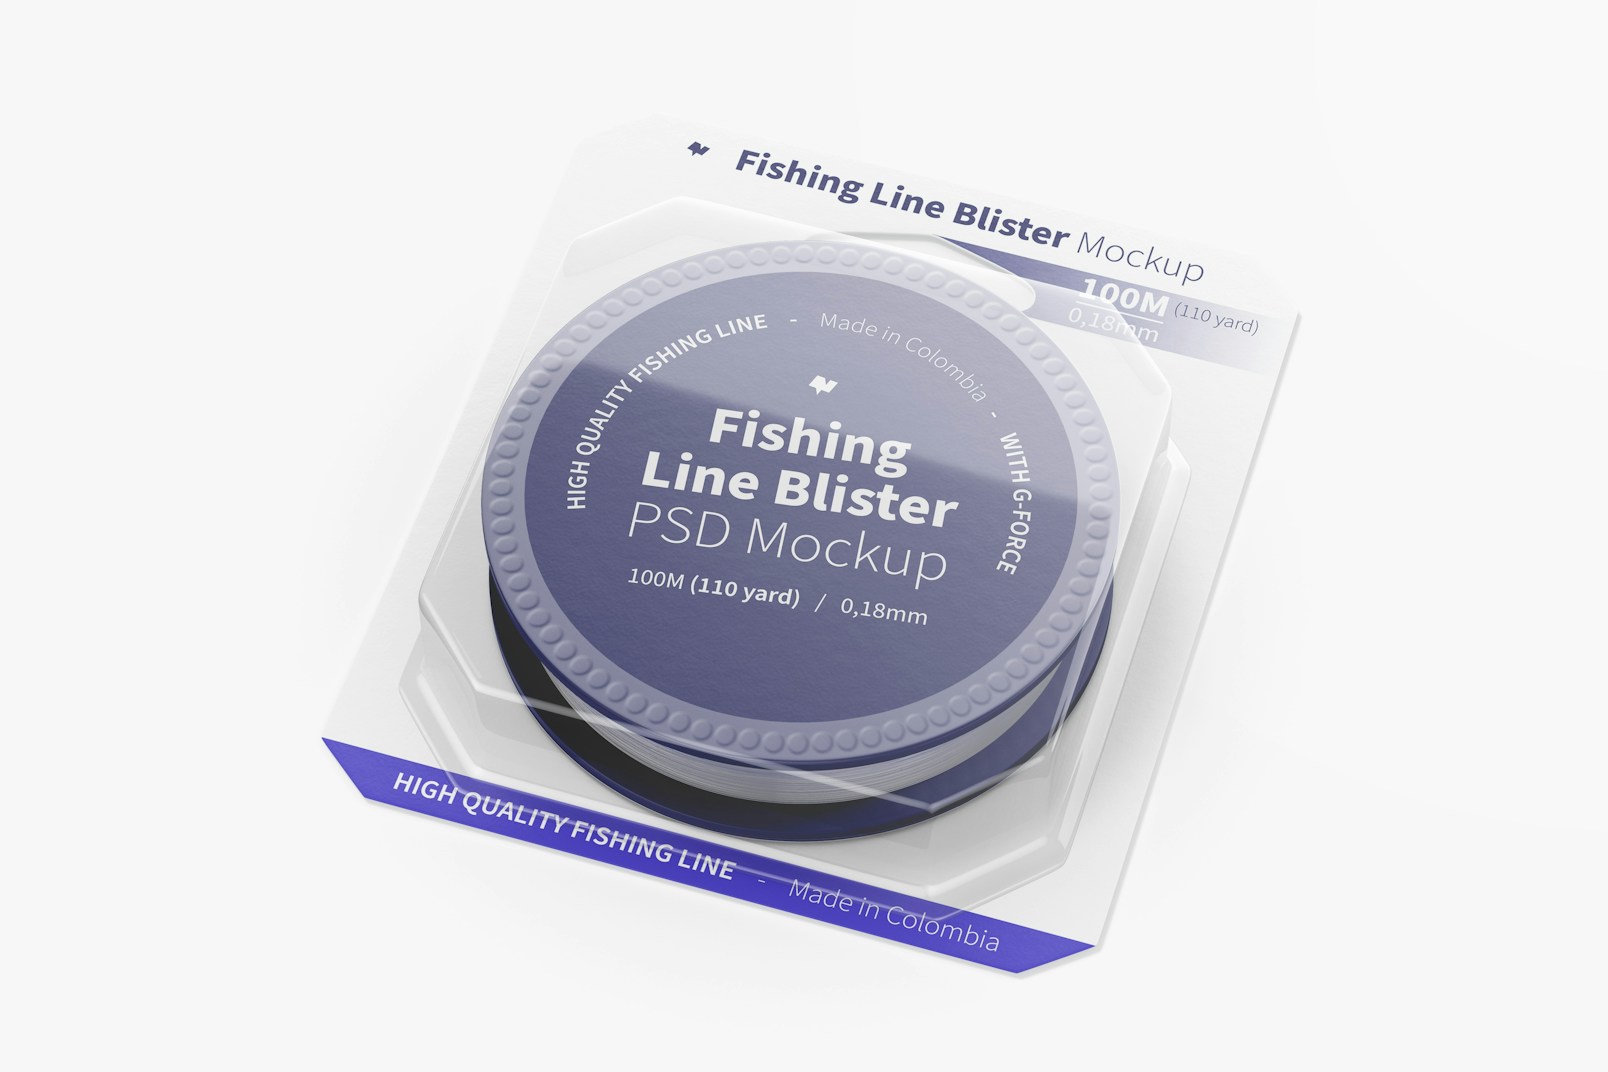 Fishing Line Blister Mockup, Perspective